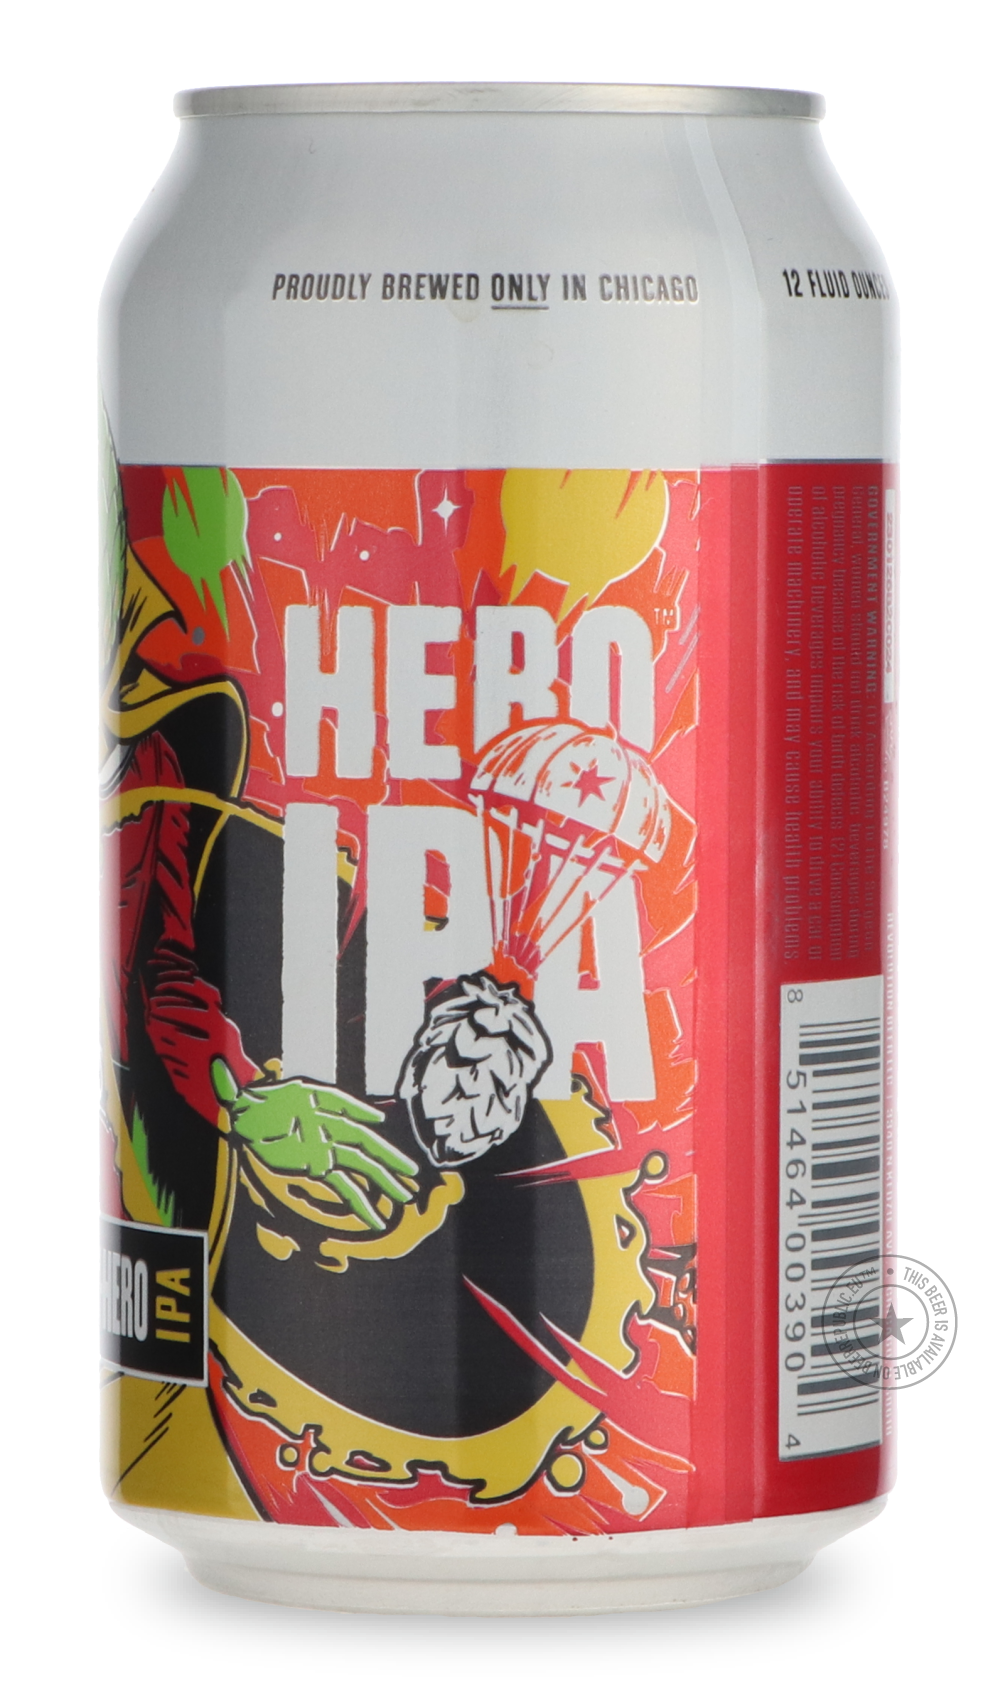 -Revolution- Infinity-Hero-IPA- Only @ Beer Republic - The best online beer store for American & Canadian craft beer - Buy beer online from the USA and Canada - Bier online kopen - Amerikaans bier kopen - Craft beer store - Craft beer kopen - Amerikanisch bier kaufen - Bier online kaufen - Acheter biere online - IPA - Stout - Porter - New England IPA - Hazy IPA - Imperial Stout - Barrel Aged - Barrel Aged Imperial Stout - Brown - Dark beer - Blond - Blonde - Pilsner - Lager - Wheat - Weizen - Amber - Barley